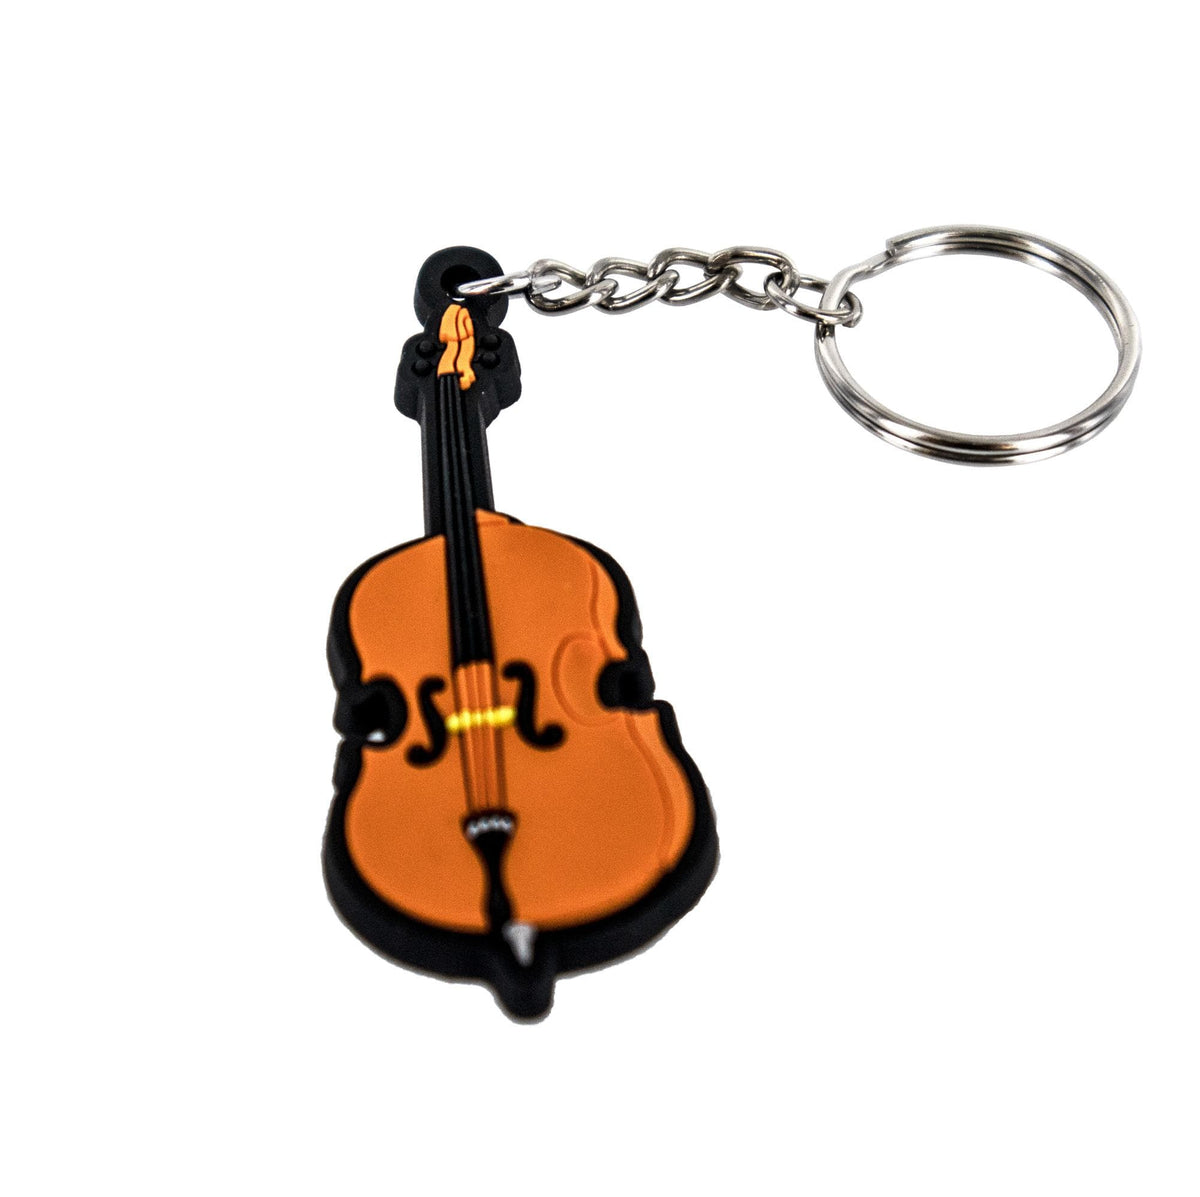 Cello Shaped Keychain